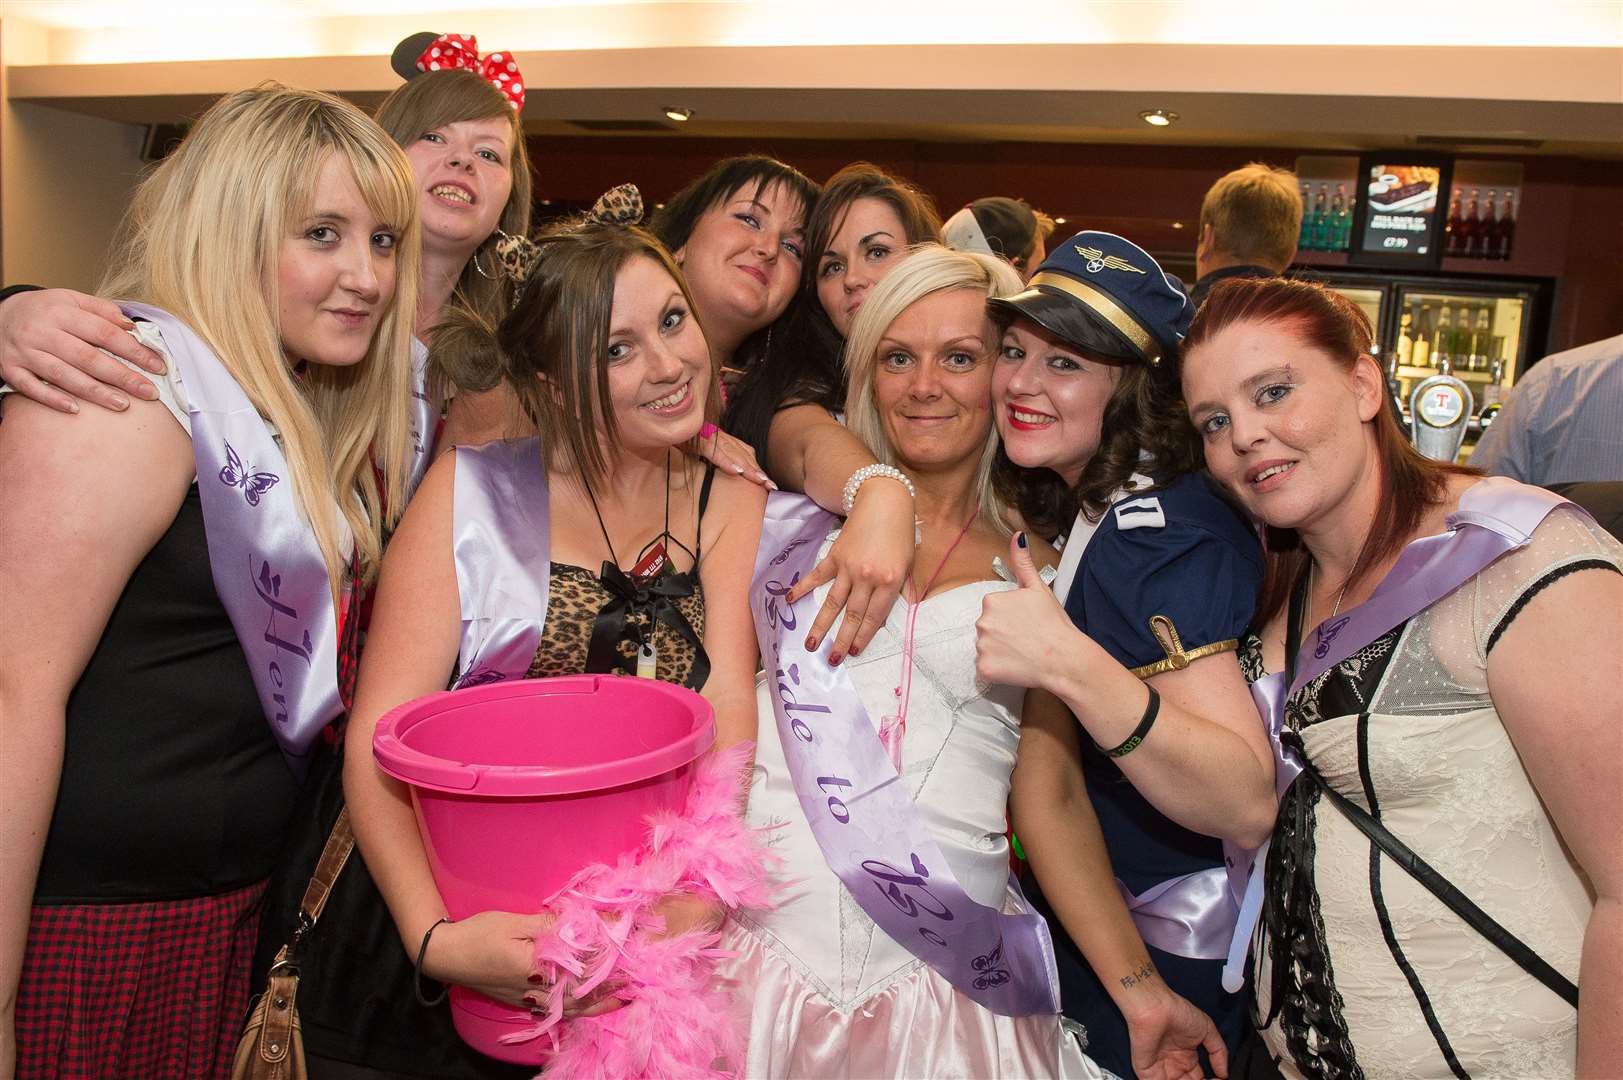 Frances Cameron (white wedding dress) on her Hen night in Wetherspoon. Picture: Callum Mackay.